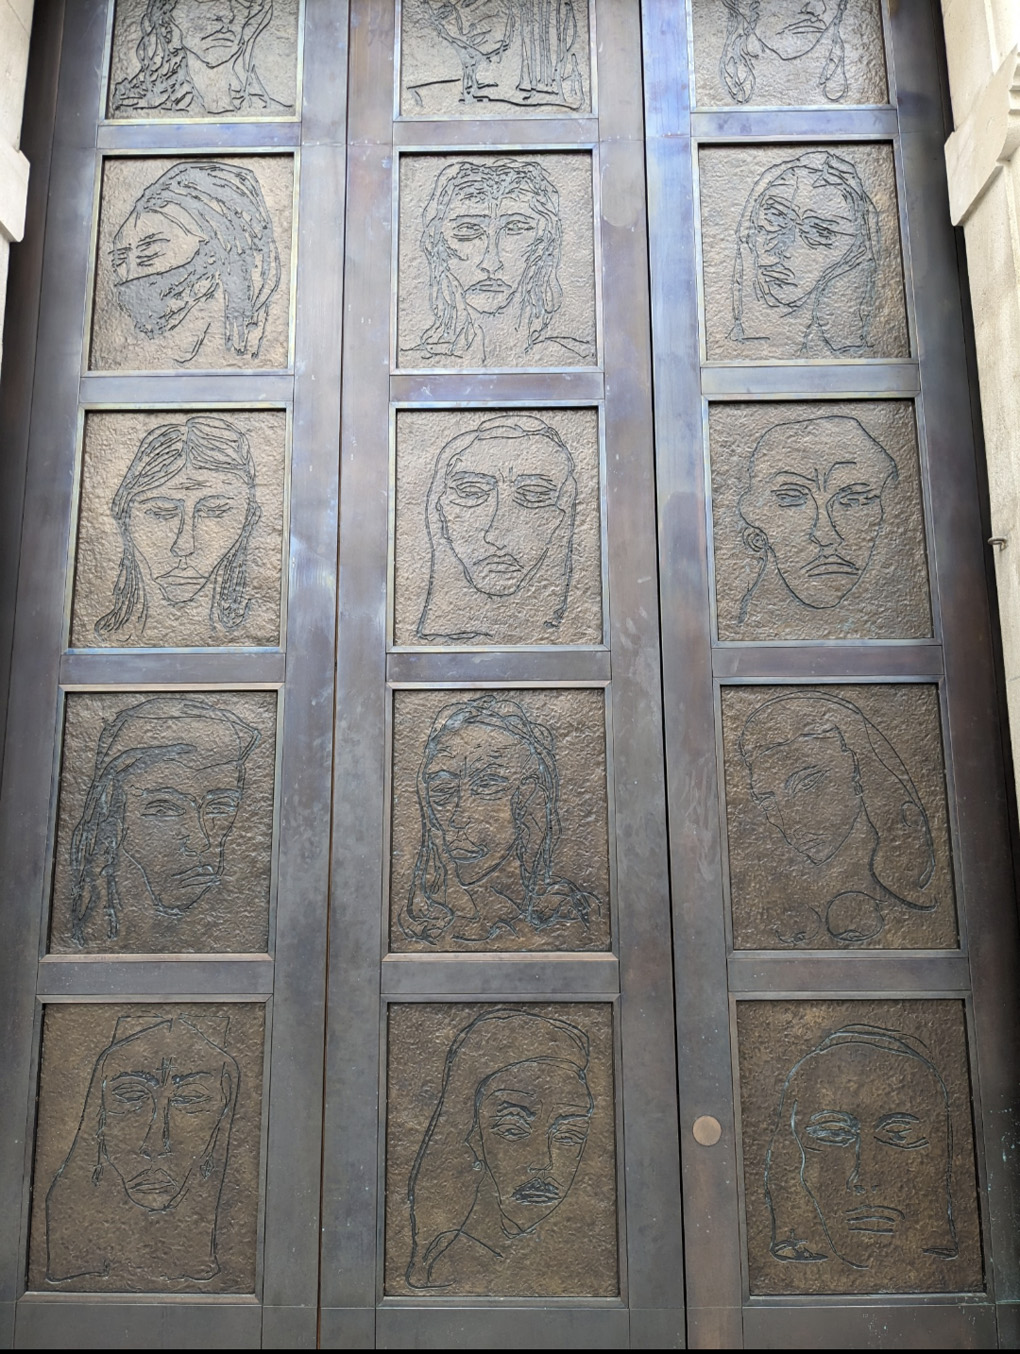 Doors by Tracey Emin featuring many faces sketched into bronze